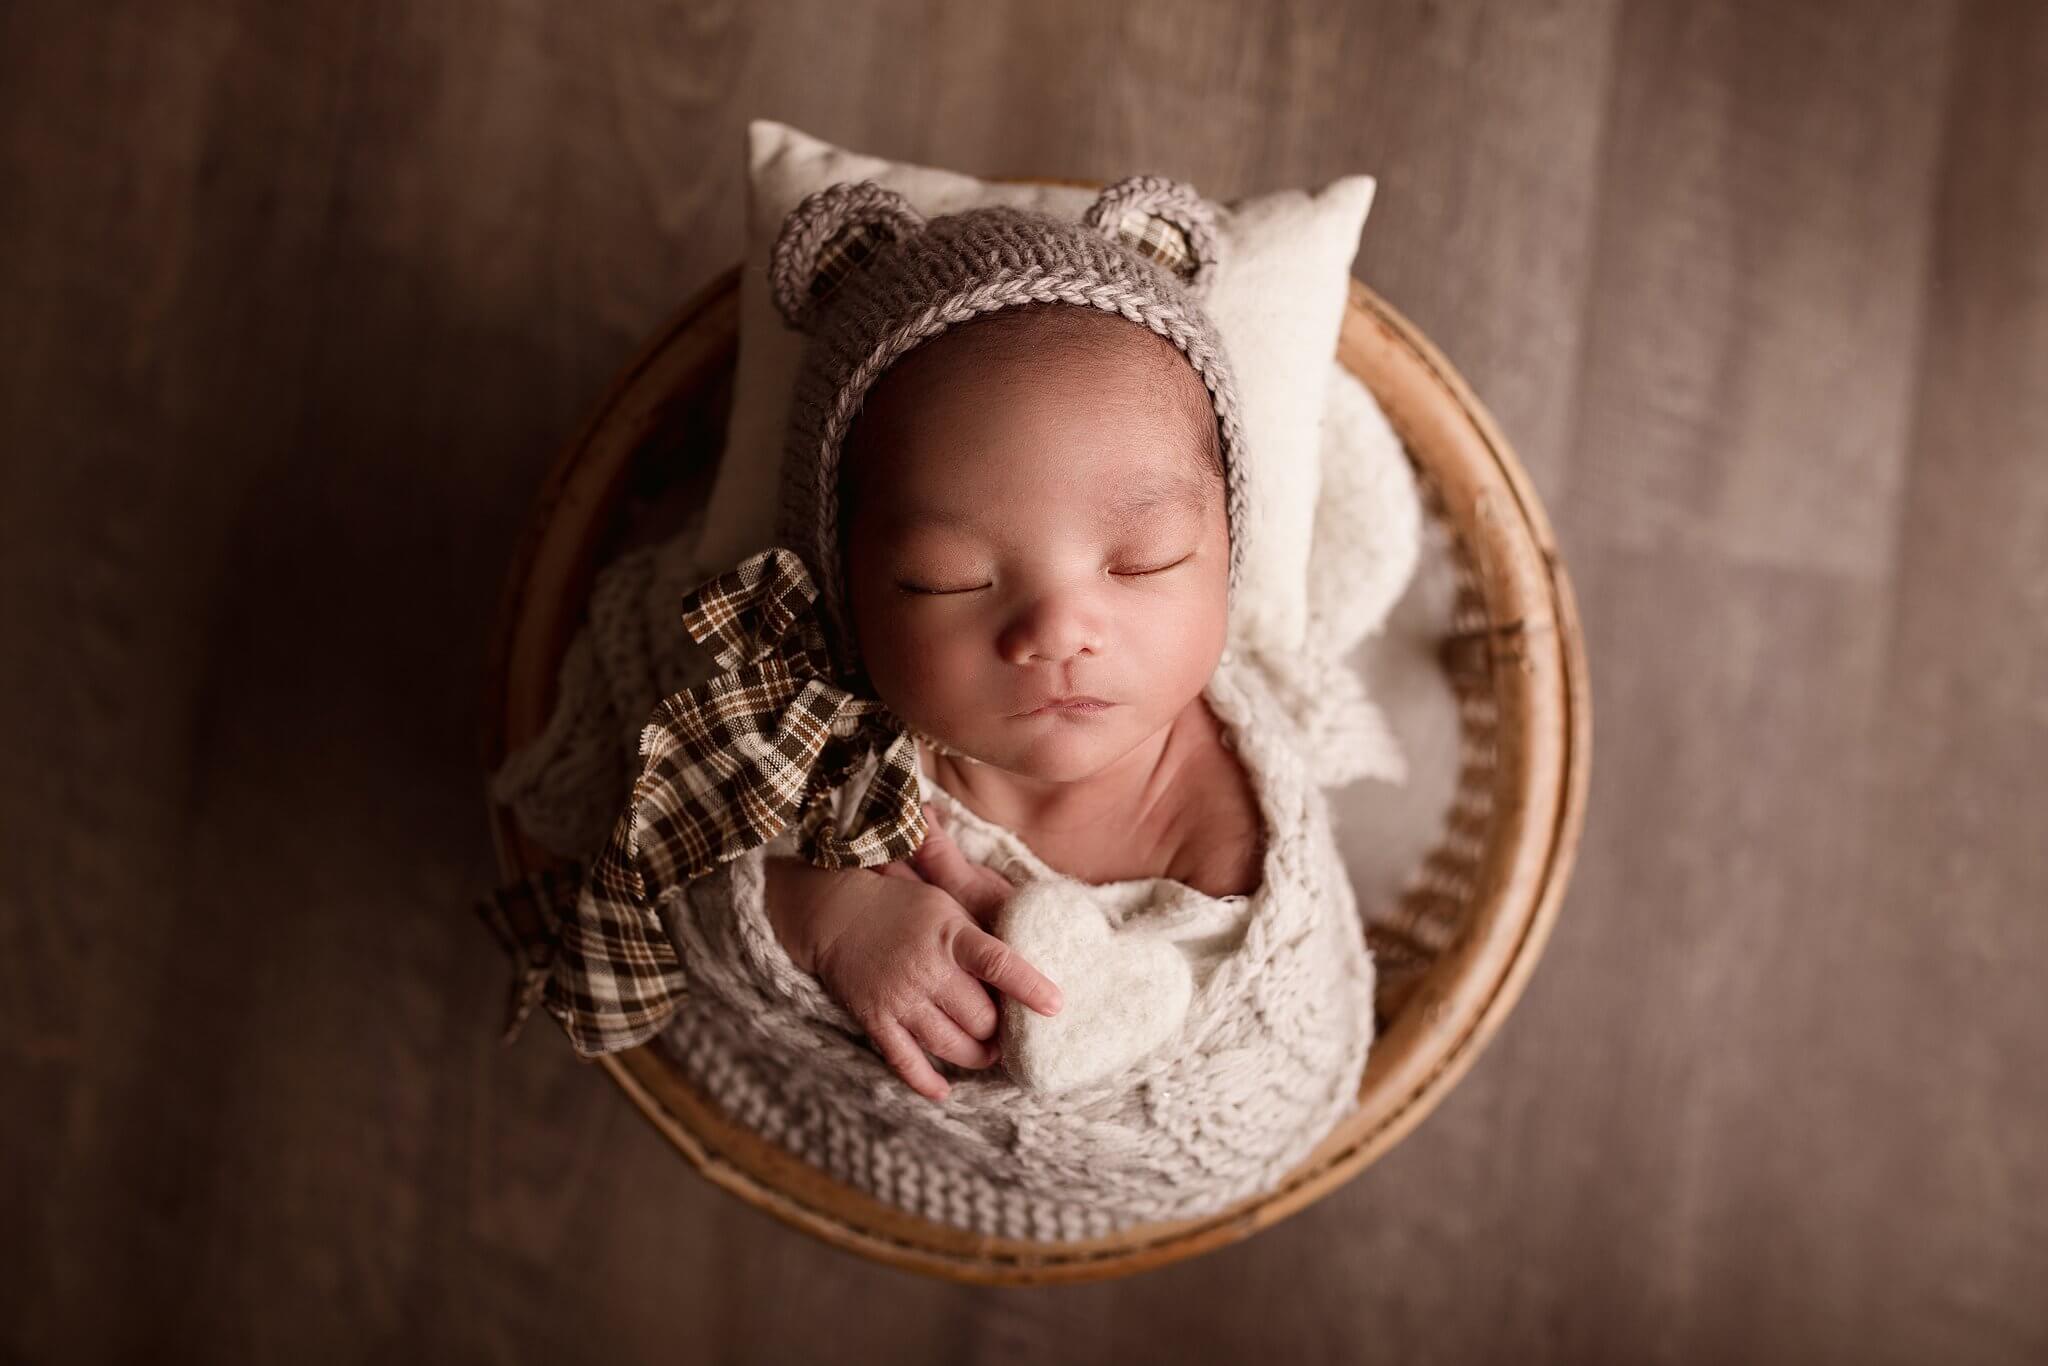 Adorable Newborn boy in a round basket wearing a teddy bear hat with plaid ties, holding a felt heart